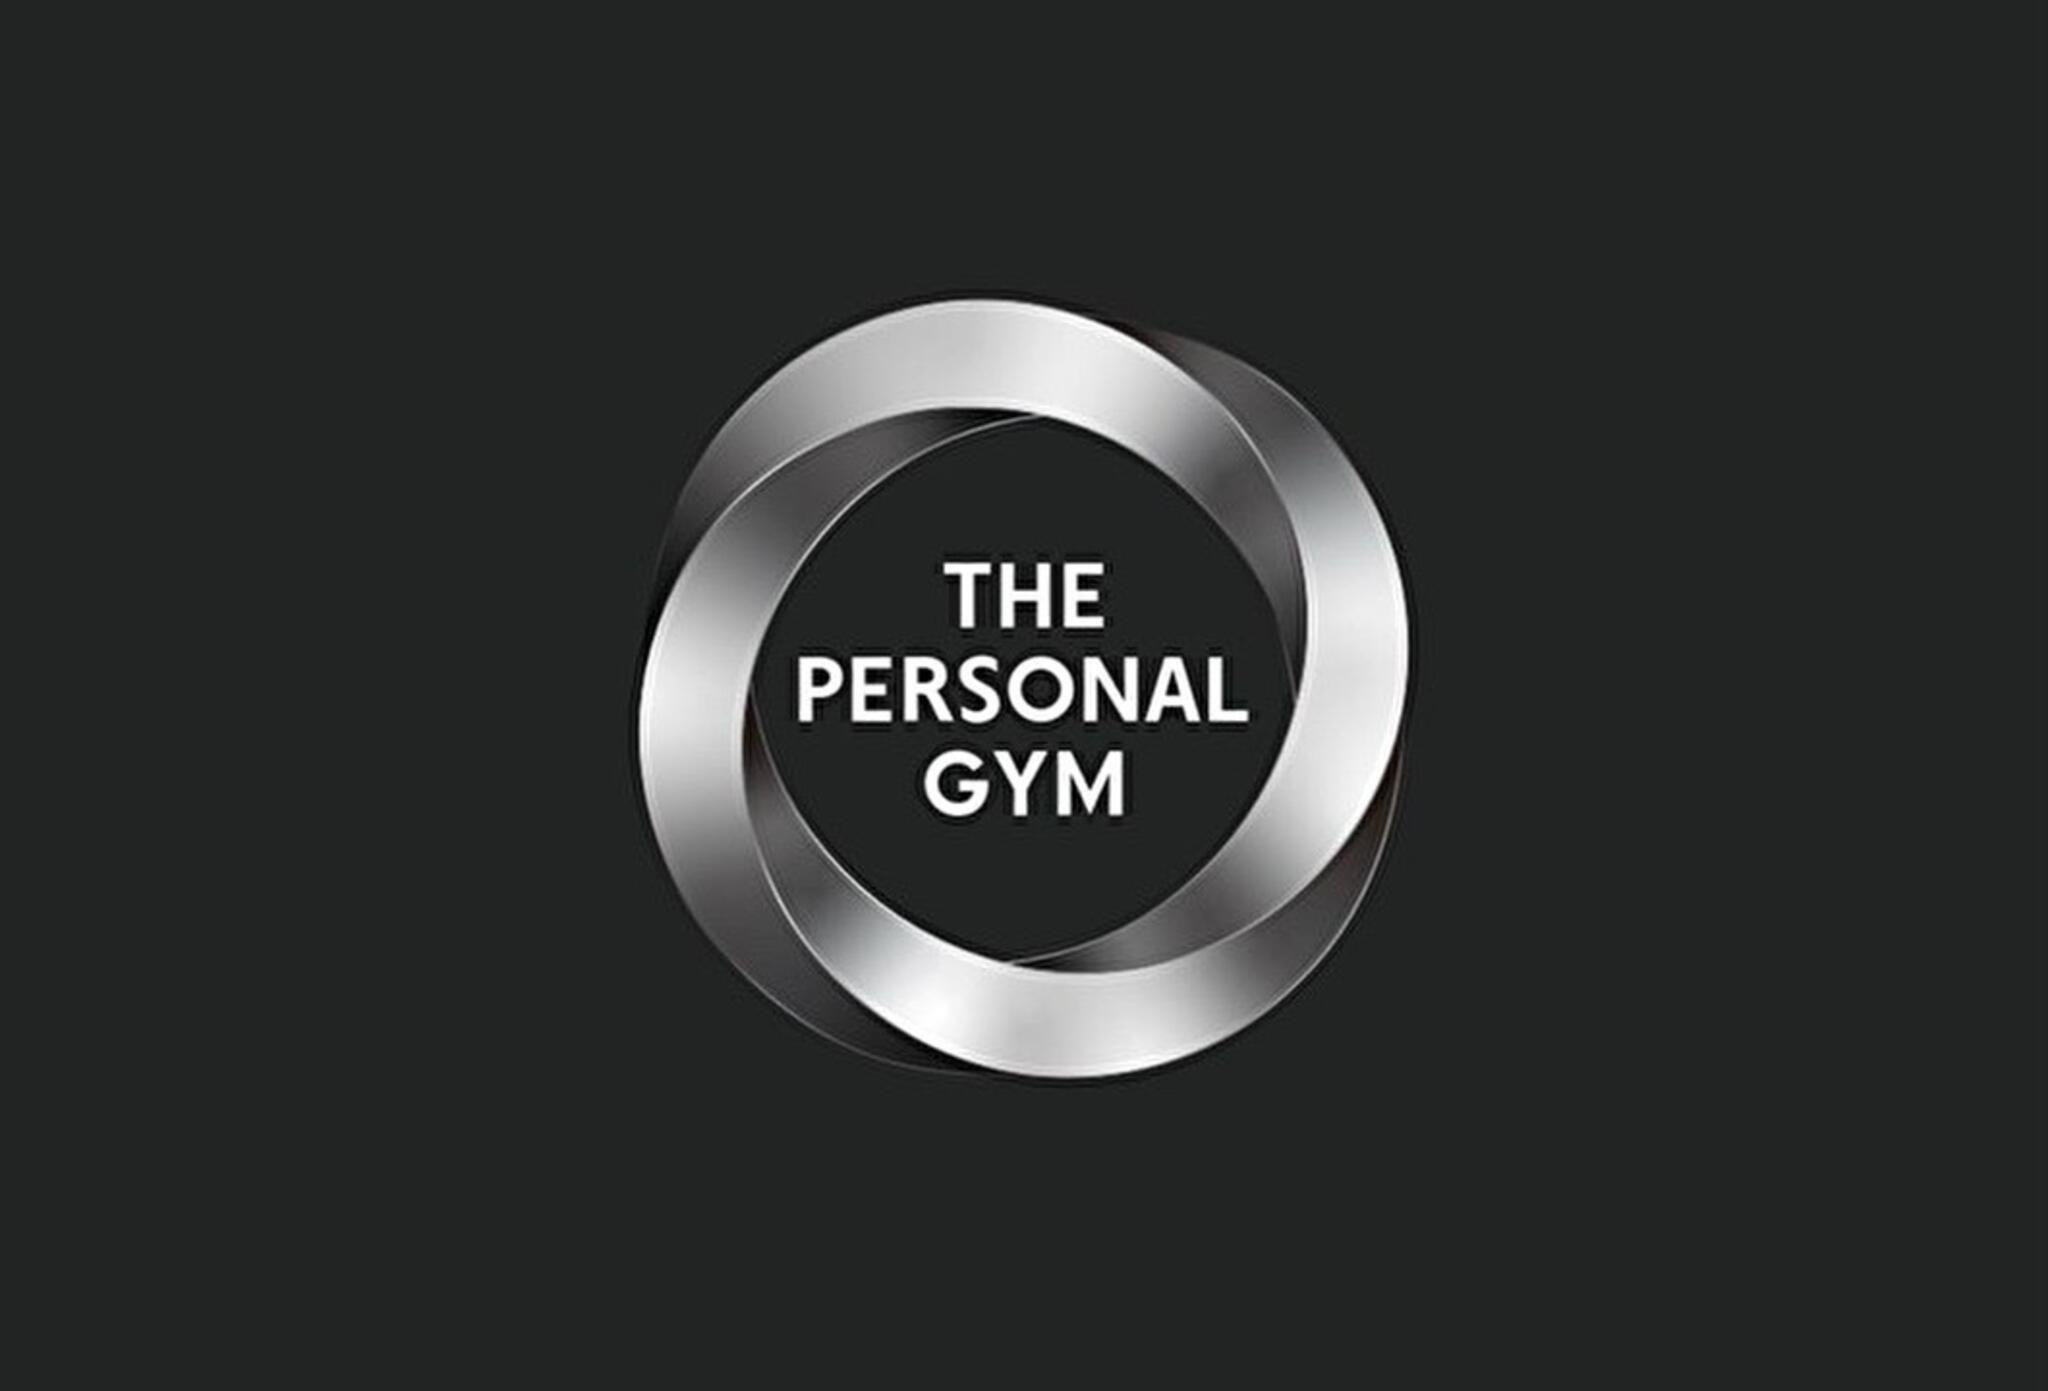 THE PERSONAL GYM 新宿御苑店の代表写真1